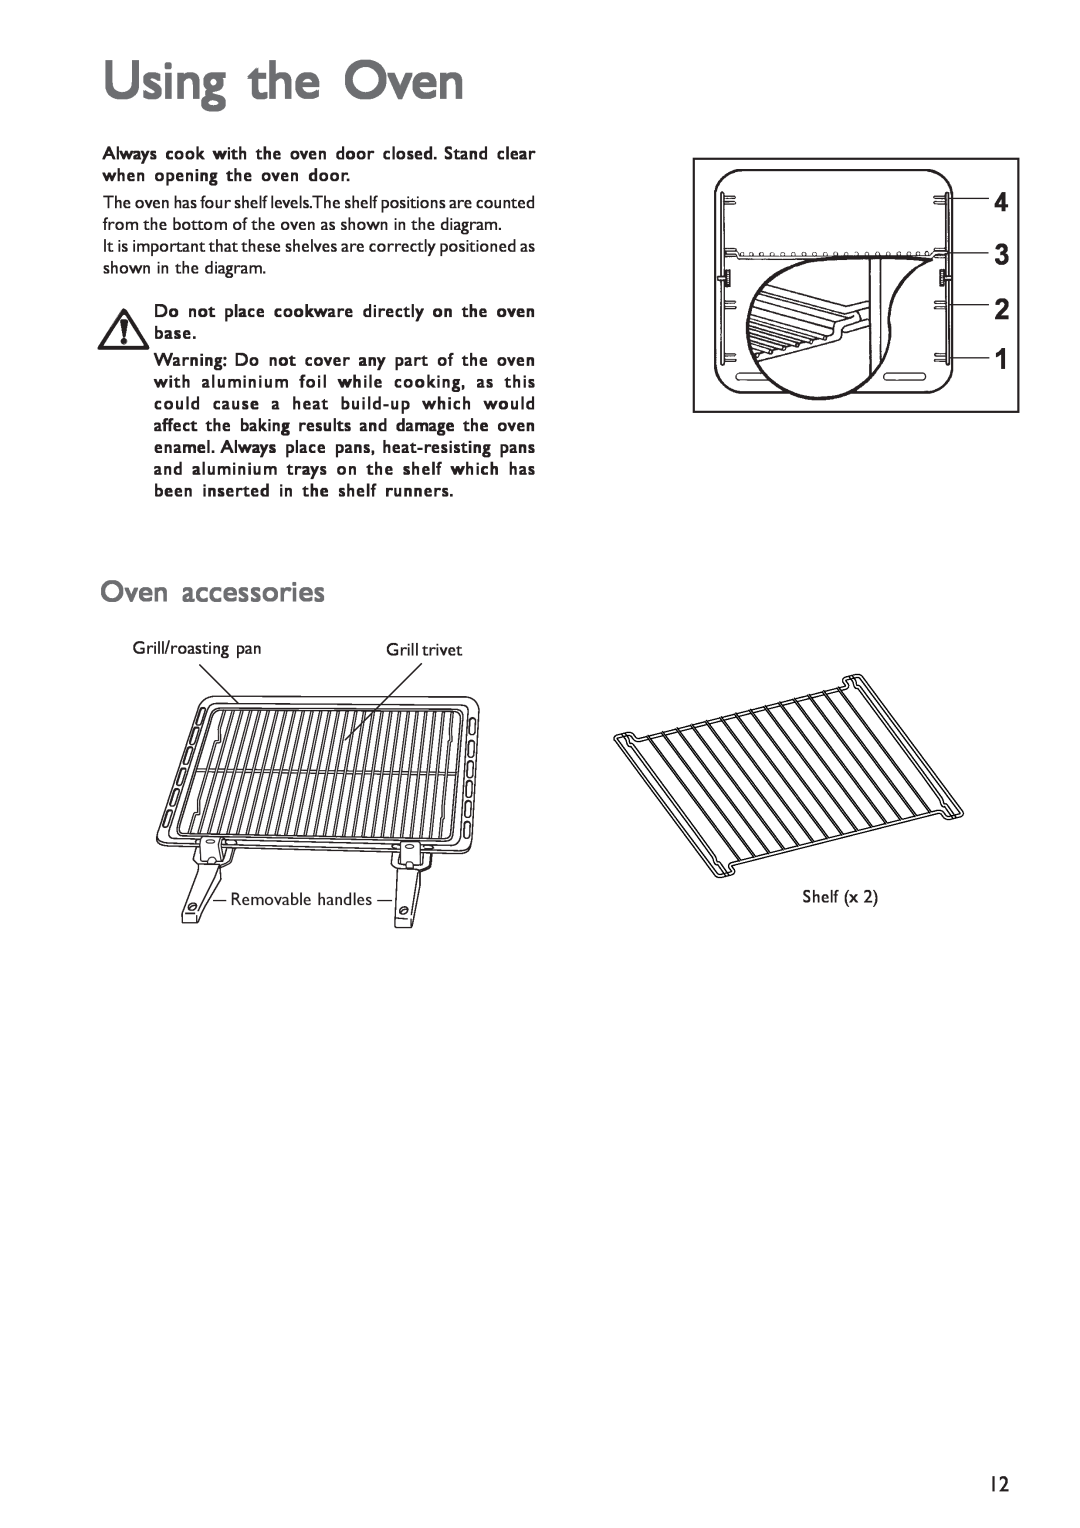 John Lewis JLBIOS601 instruction manual Using the Oven, Oven accessories 